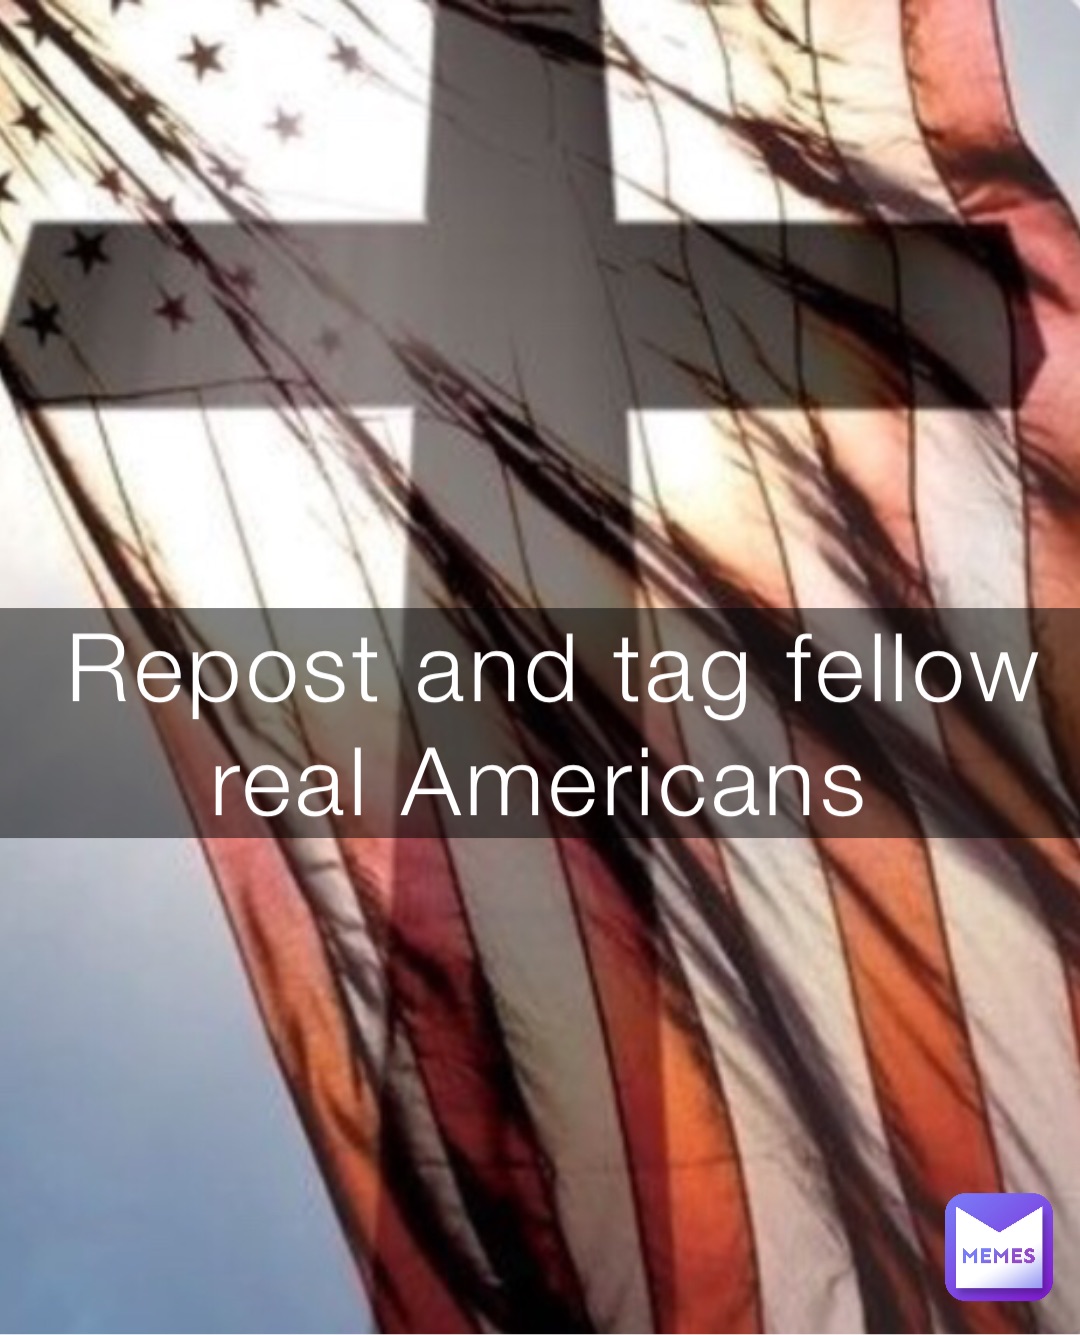 Repost and tag fellow real Americans